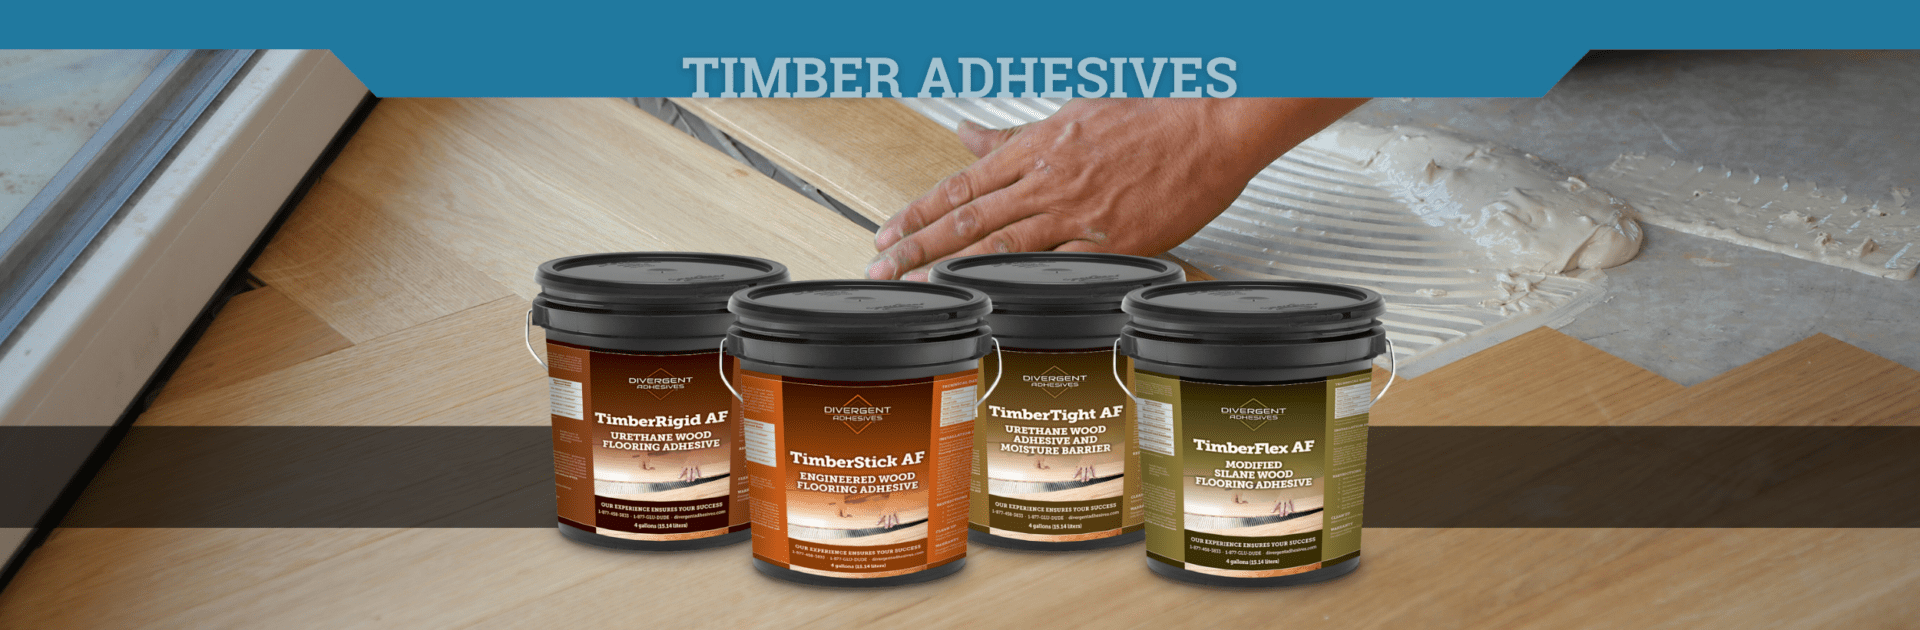 A group of wood products with the words timber adhesives in front.